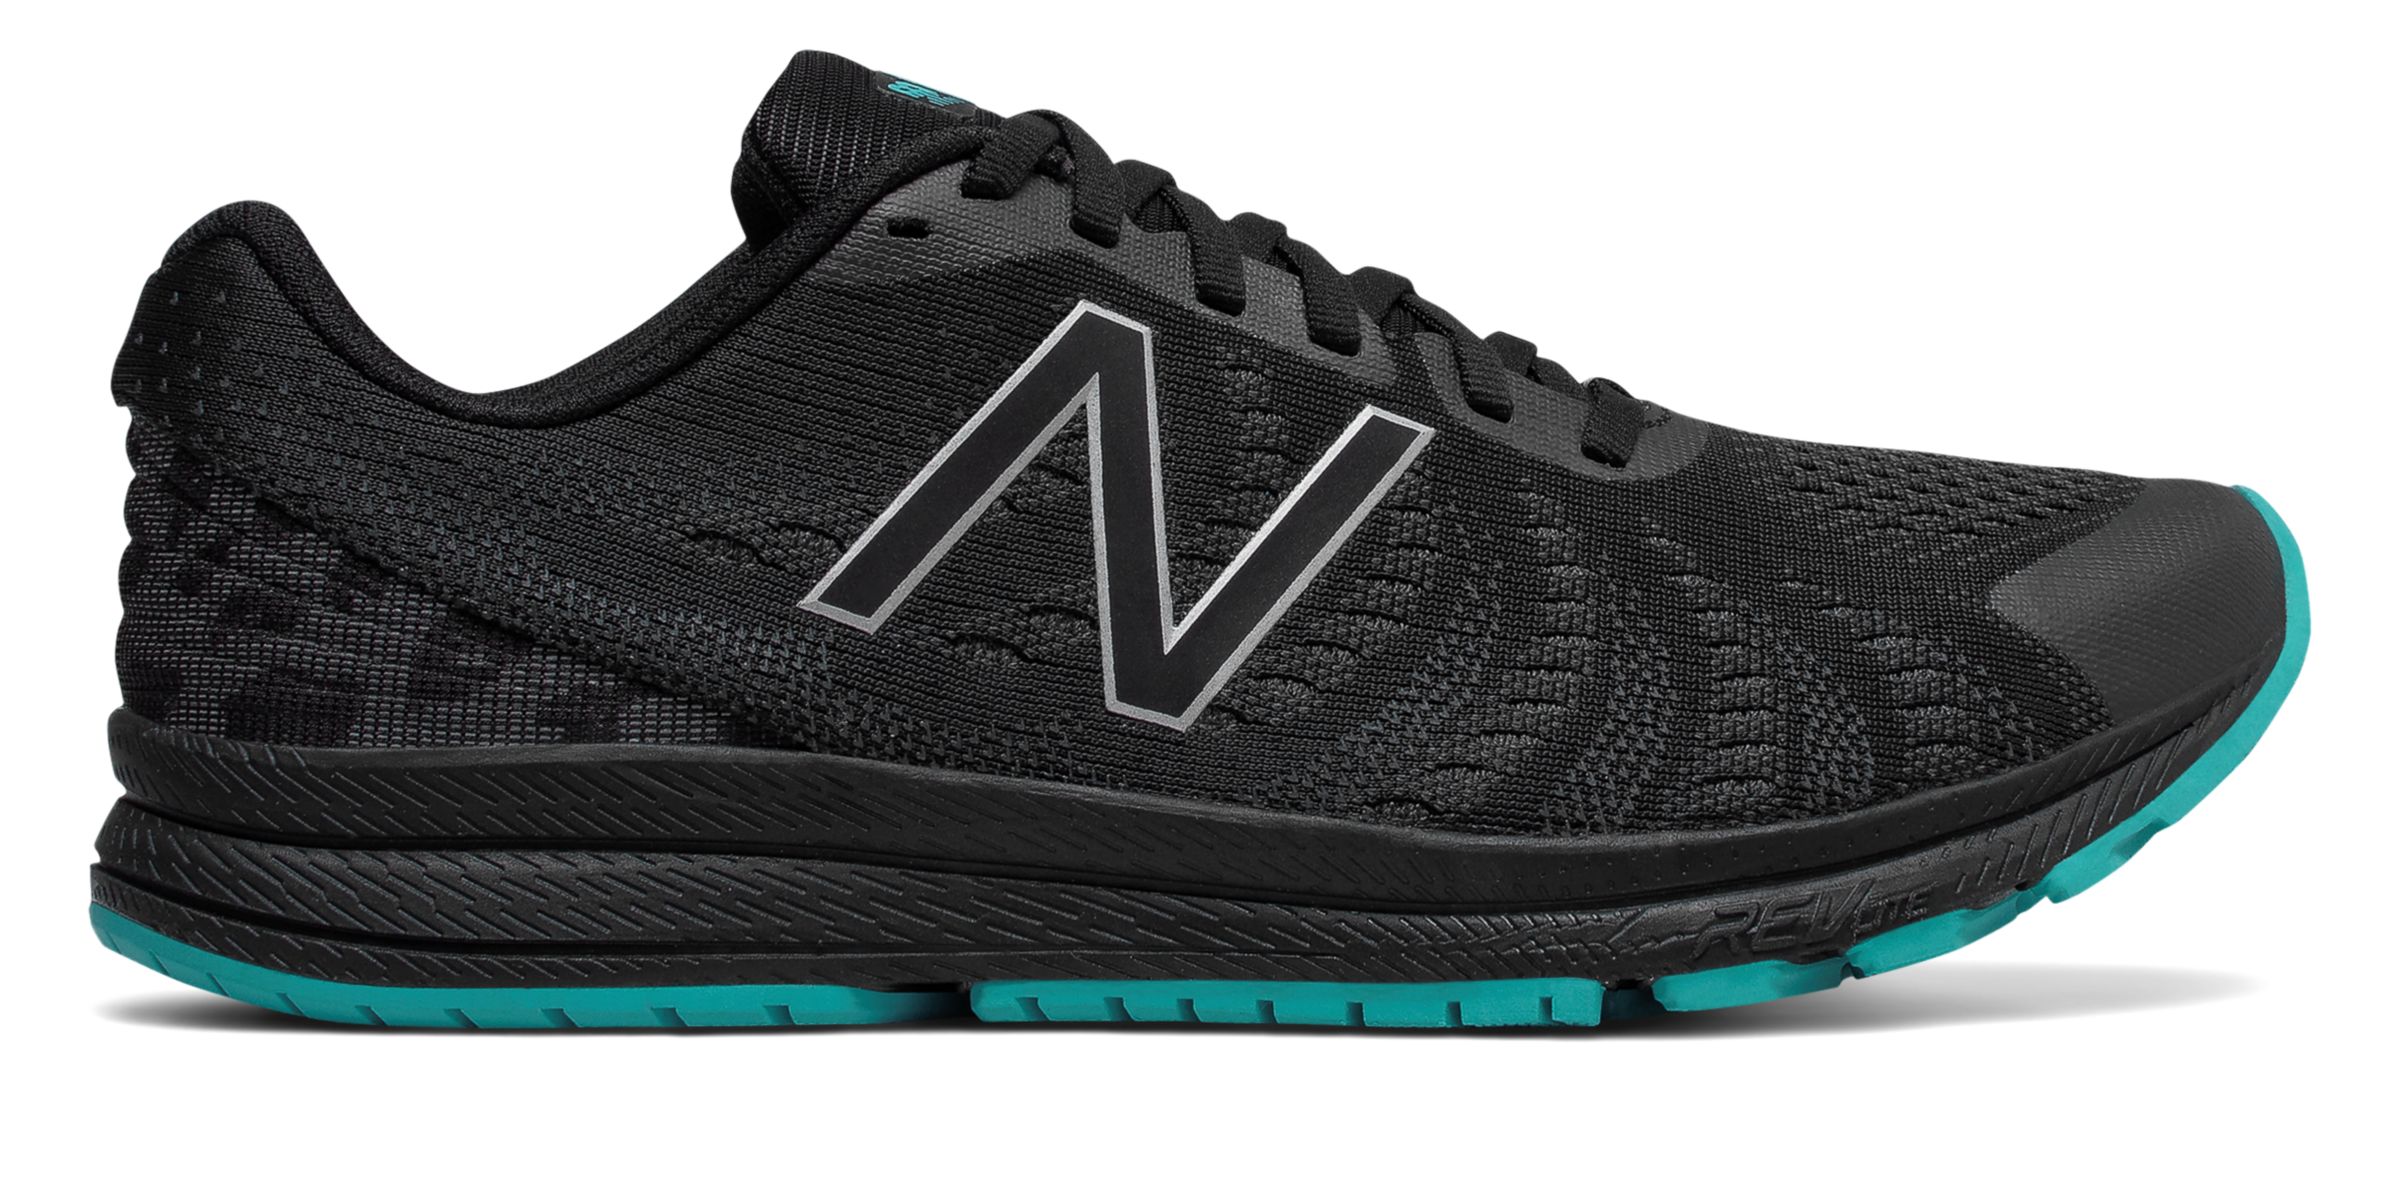 New Balance MRUSH-VV3 on Sale - Discounts Up to 20% Off on MRUSHSB3 at  Joe's New Balance Outlet